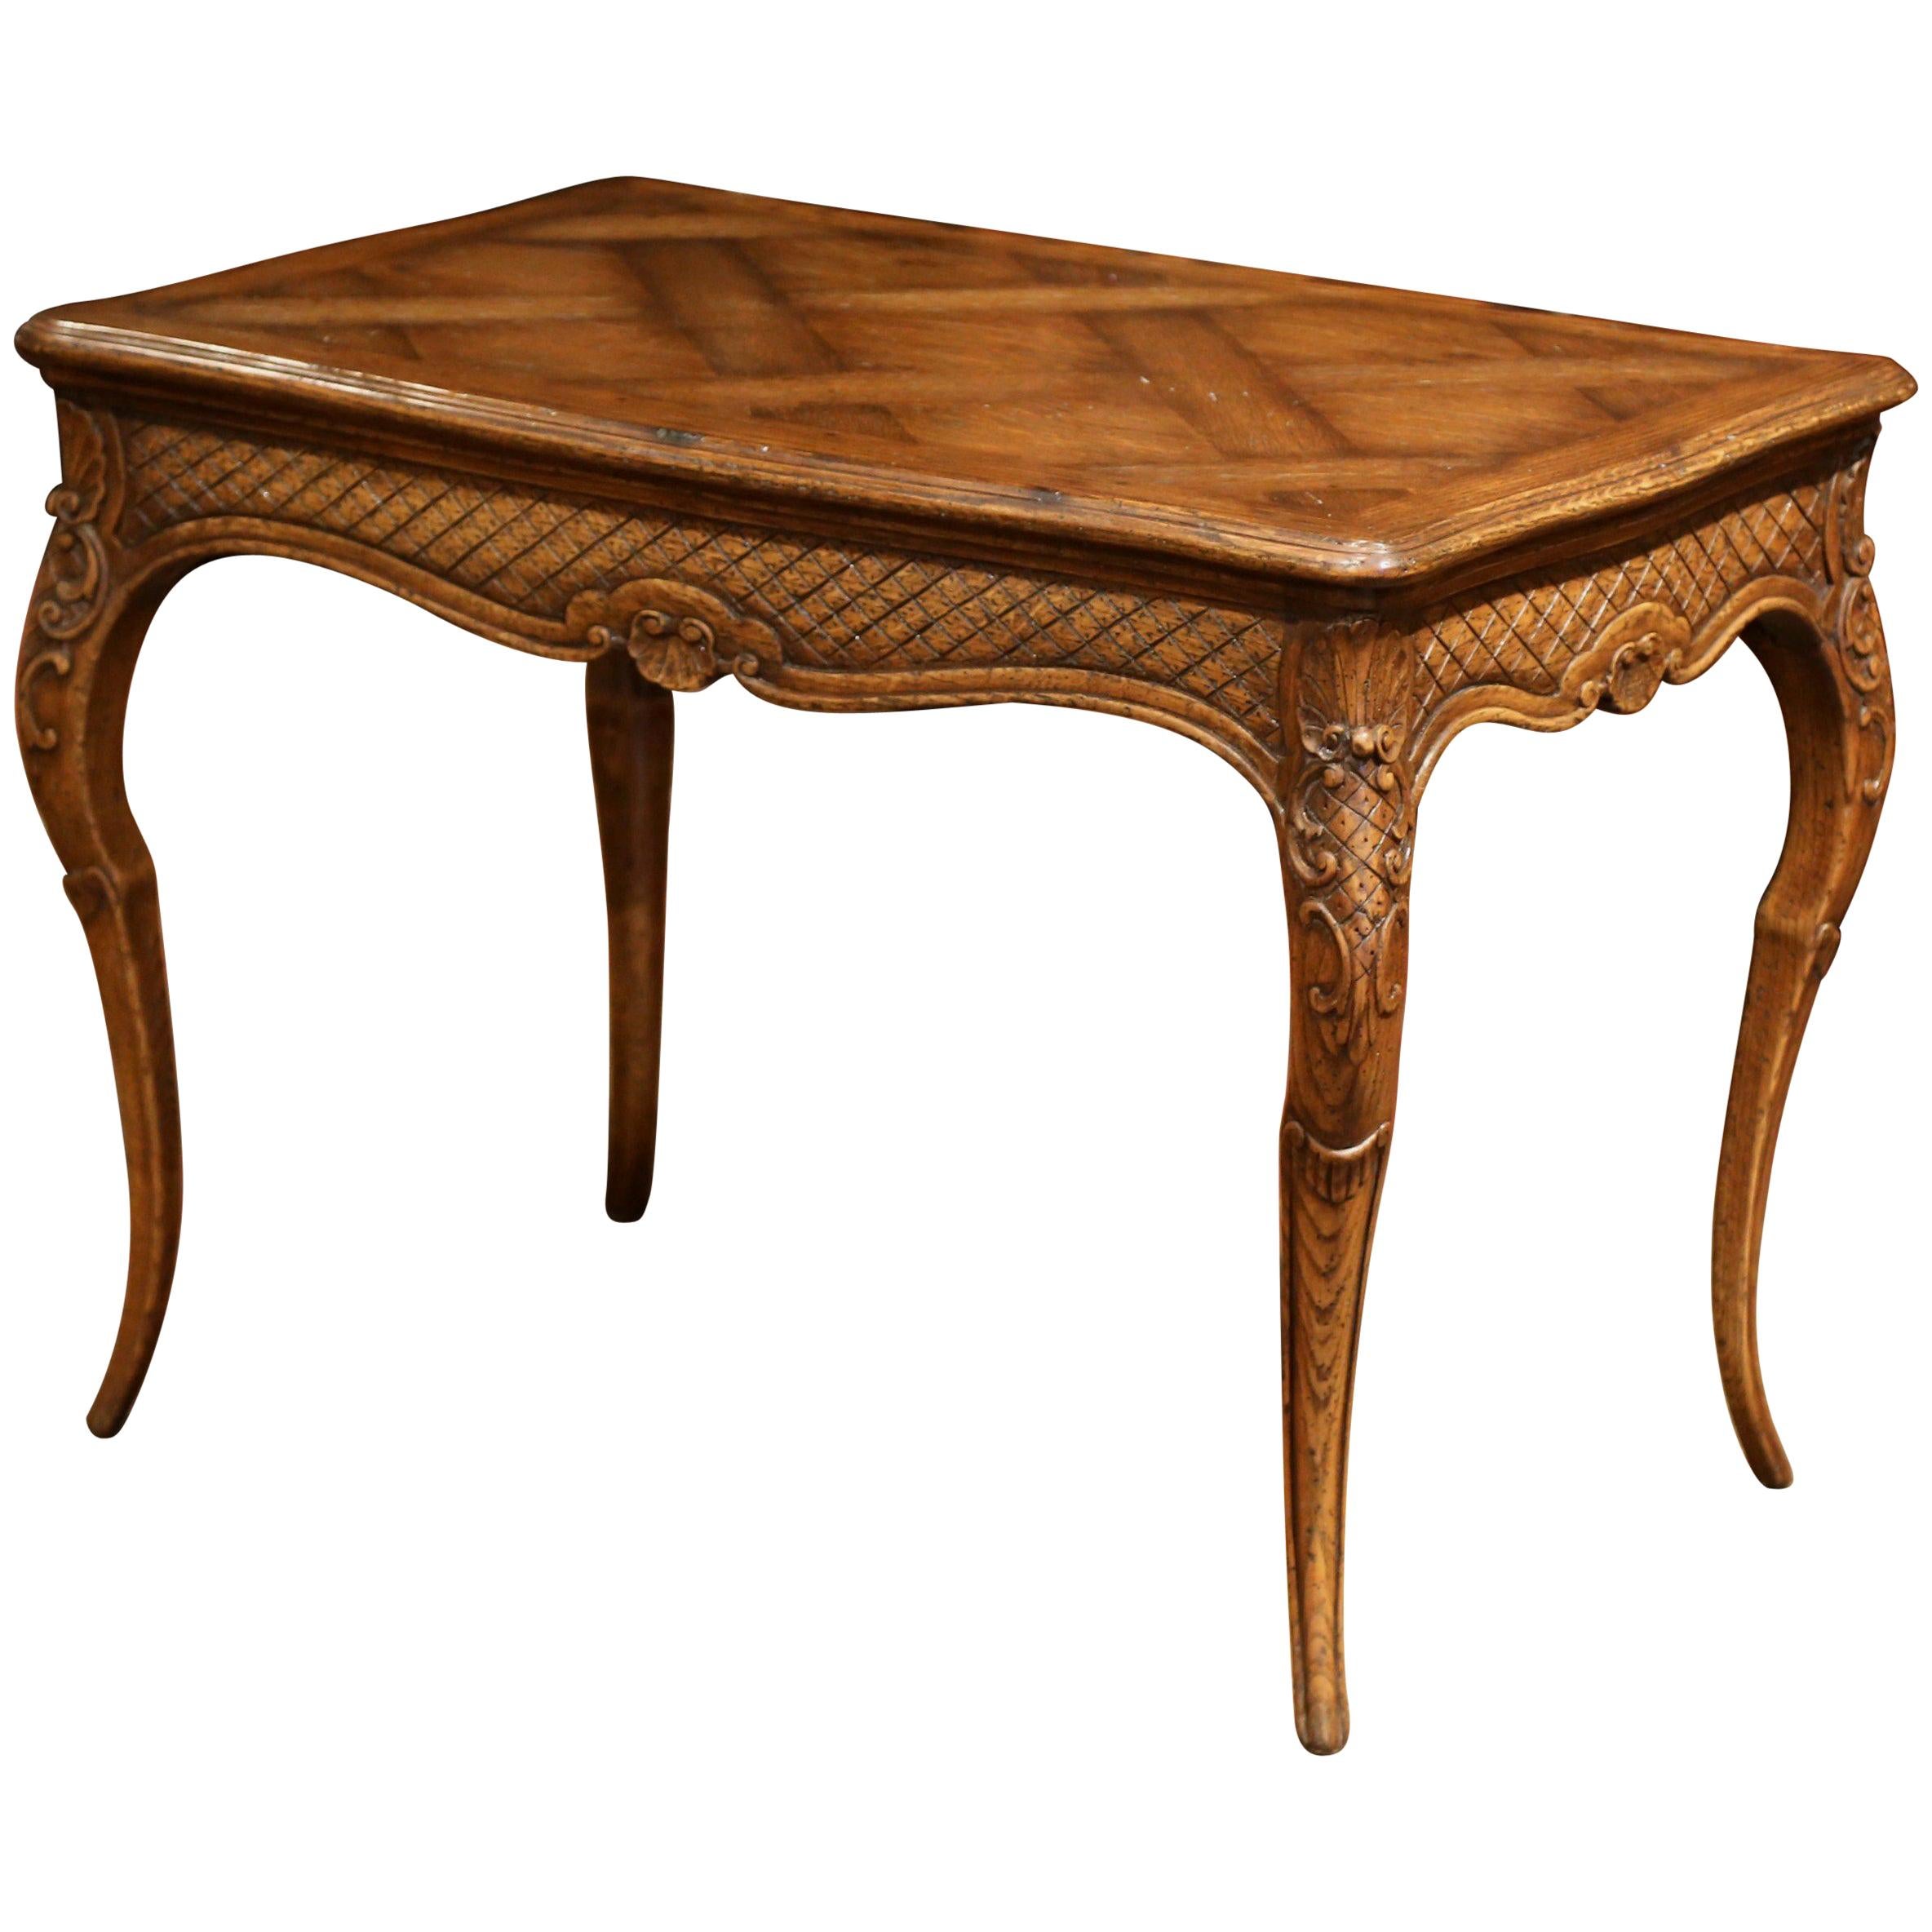 Midcentury French Louis XV Carved Oak Side Table with Inlay Parquetry Decor For Sale